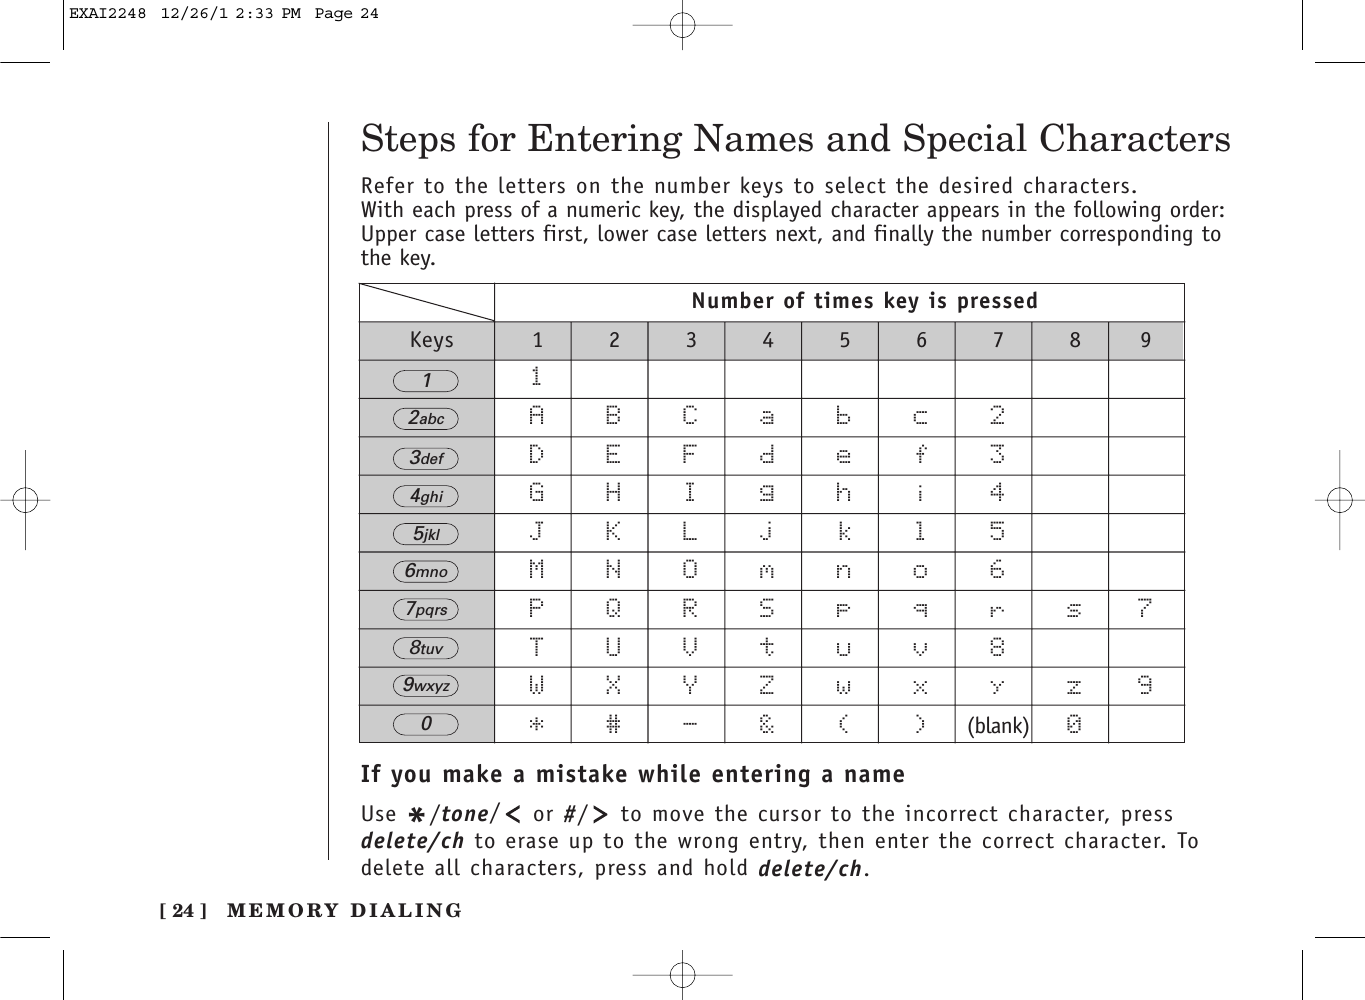 Steps for Entering Names and Special Characters[ 24 ]Refer to the letters on the number keys to select the desired characters.With each press of a numeric key, the displayed character appears in the following order: Upper case letters first, lower case letters next, and finally the number corresponding tothe key.If you make a mistake while entering a nameUse */tone/or #/ to move the cursor to the incorrect character, pressdelete/ch to erase up to the wrong entry, then enter the correct character. Todelete all characters, press and hold delete/ch.MEMORY DIALINGNumber of times key is pressedKeys 1234567891ABCabc2DEFdef3GHIghi4JKLjkl5MNOmno6PQRSpqrs7TUVtuv8WXYZwxyz9*#-&amp;()(blank) 012abc3def4ghi5jkl6mno7pqrs8tuv9wxyz0EXAI2248  12/26/1 2:33 PM  Page 24